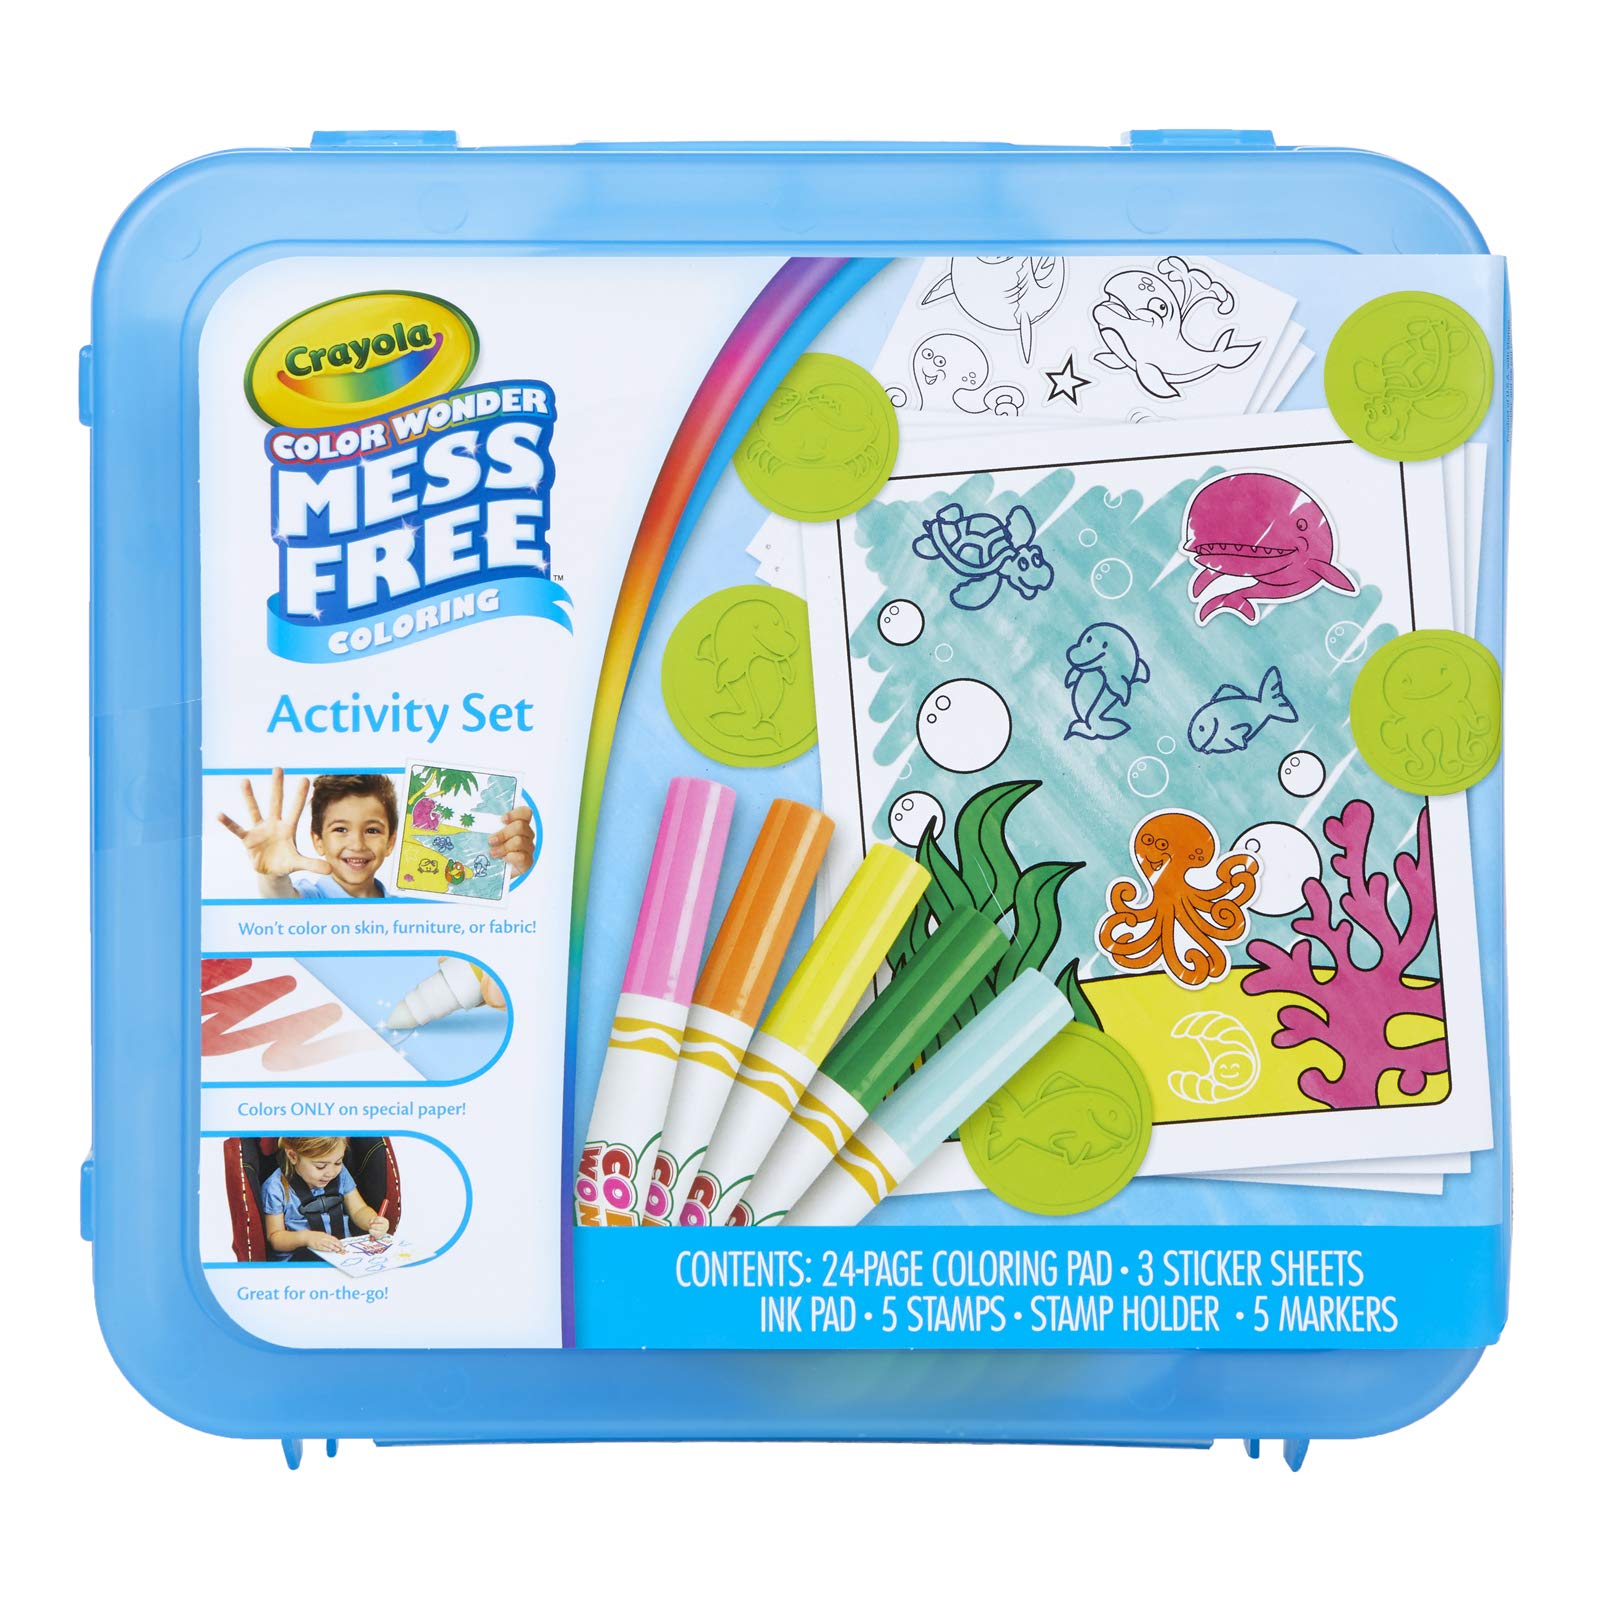 Crayola Color Wonder Mess Free Coloring Activity Set (30+ Piece), Includes Markers, Stamps, and Stickers, Toddler Toys, Gift for Kids 3, 4, 5, 6